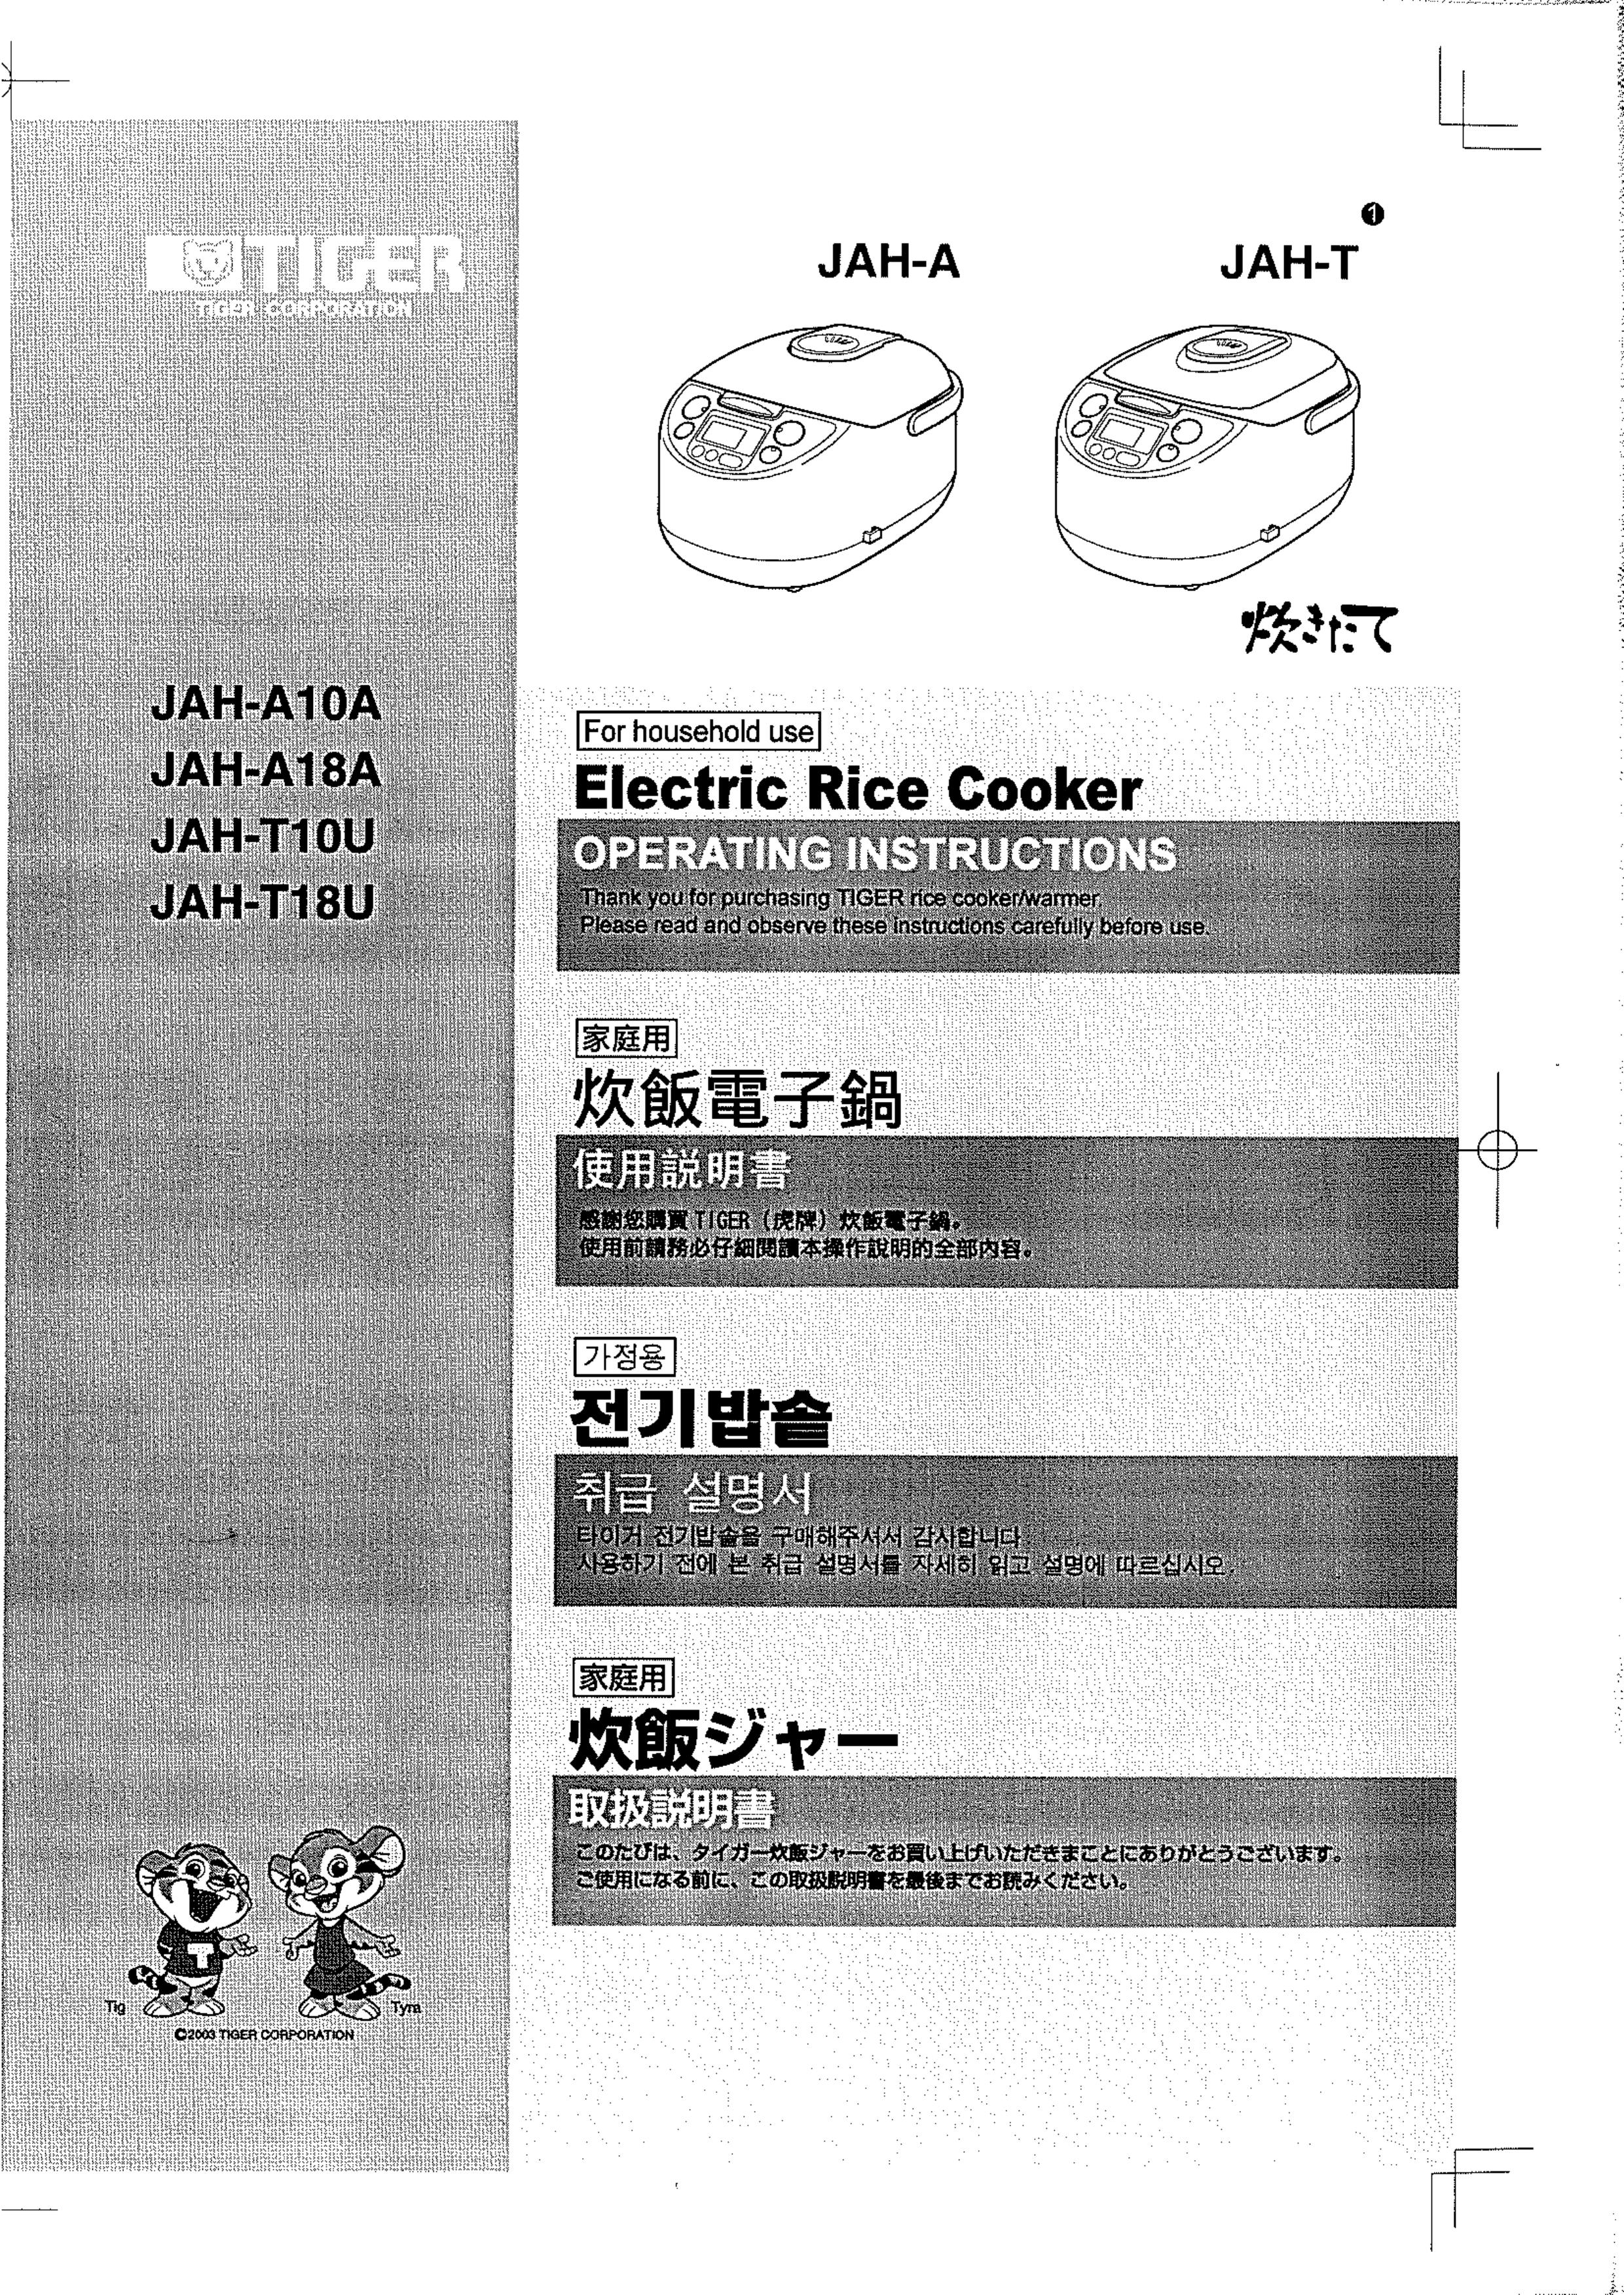 Tiger Products Co., Ltd JAH-A18A Rice Cooker User Manual